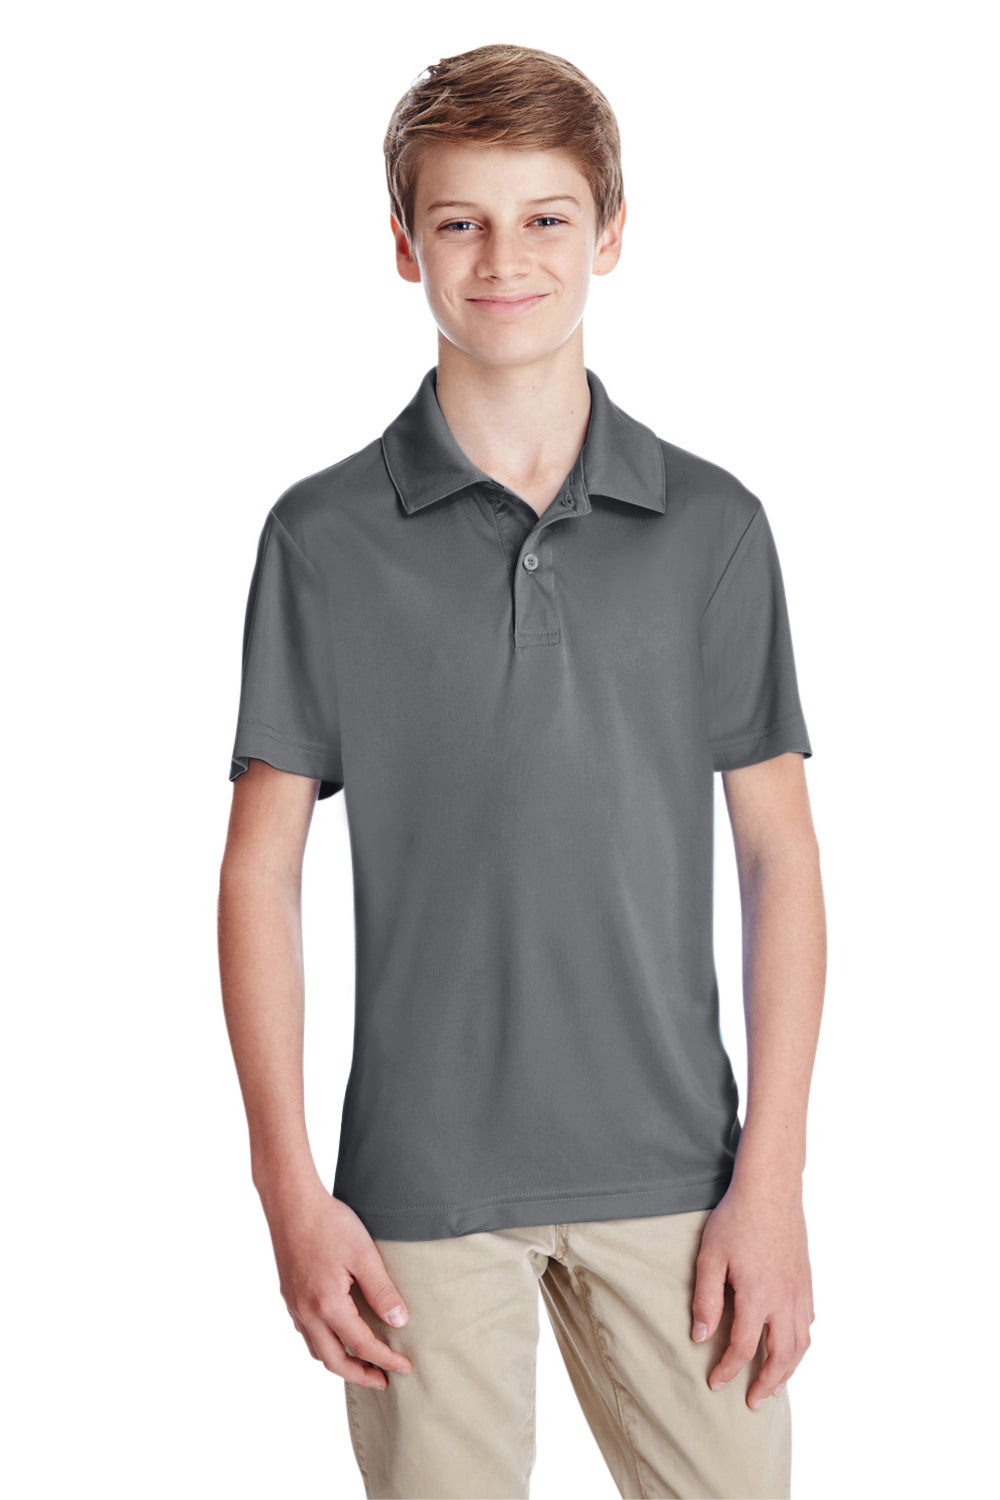 Team 365 TT51Y Youth Zone Performance Moisture Wicking Short Sleeve Polo Shirt Graphite Grey Front